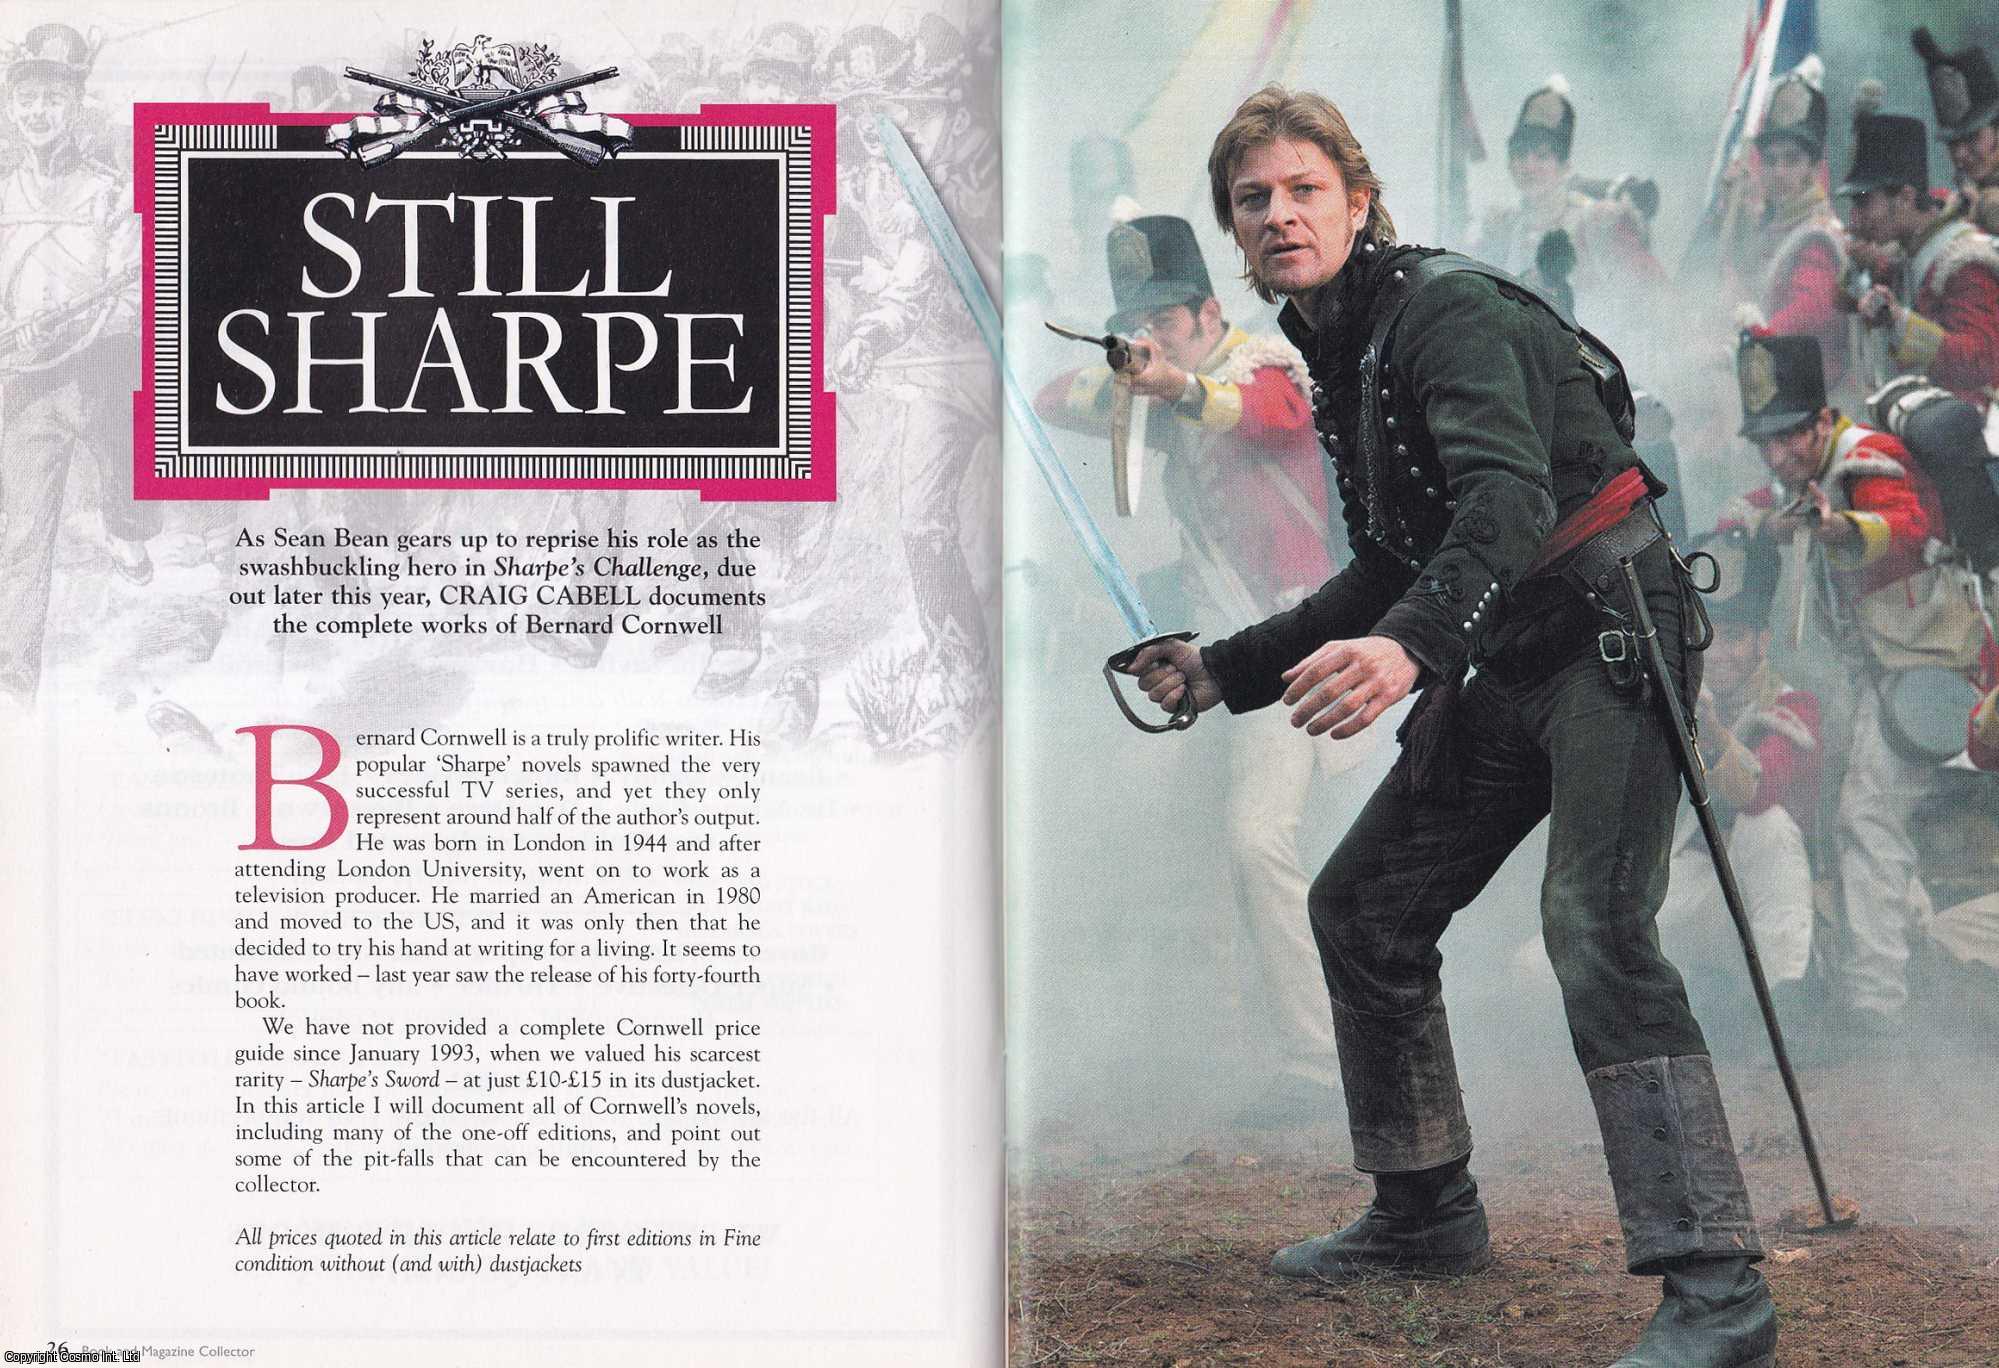 Craig Cabell - Still Sharpe (Sharpe novels by Bernard Cornwell). This is an original article separated from an issue of The Book & Magazine Collector publication.